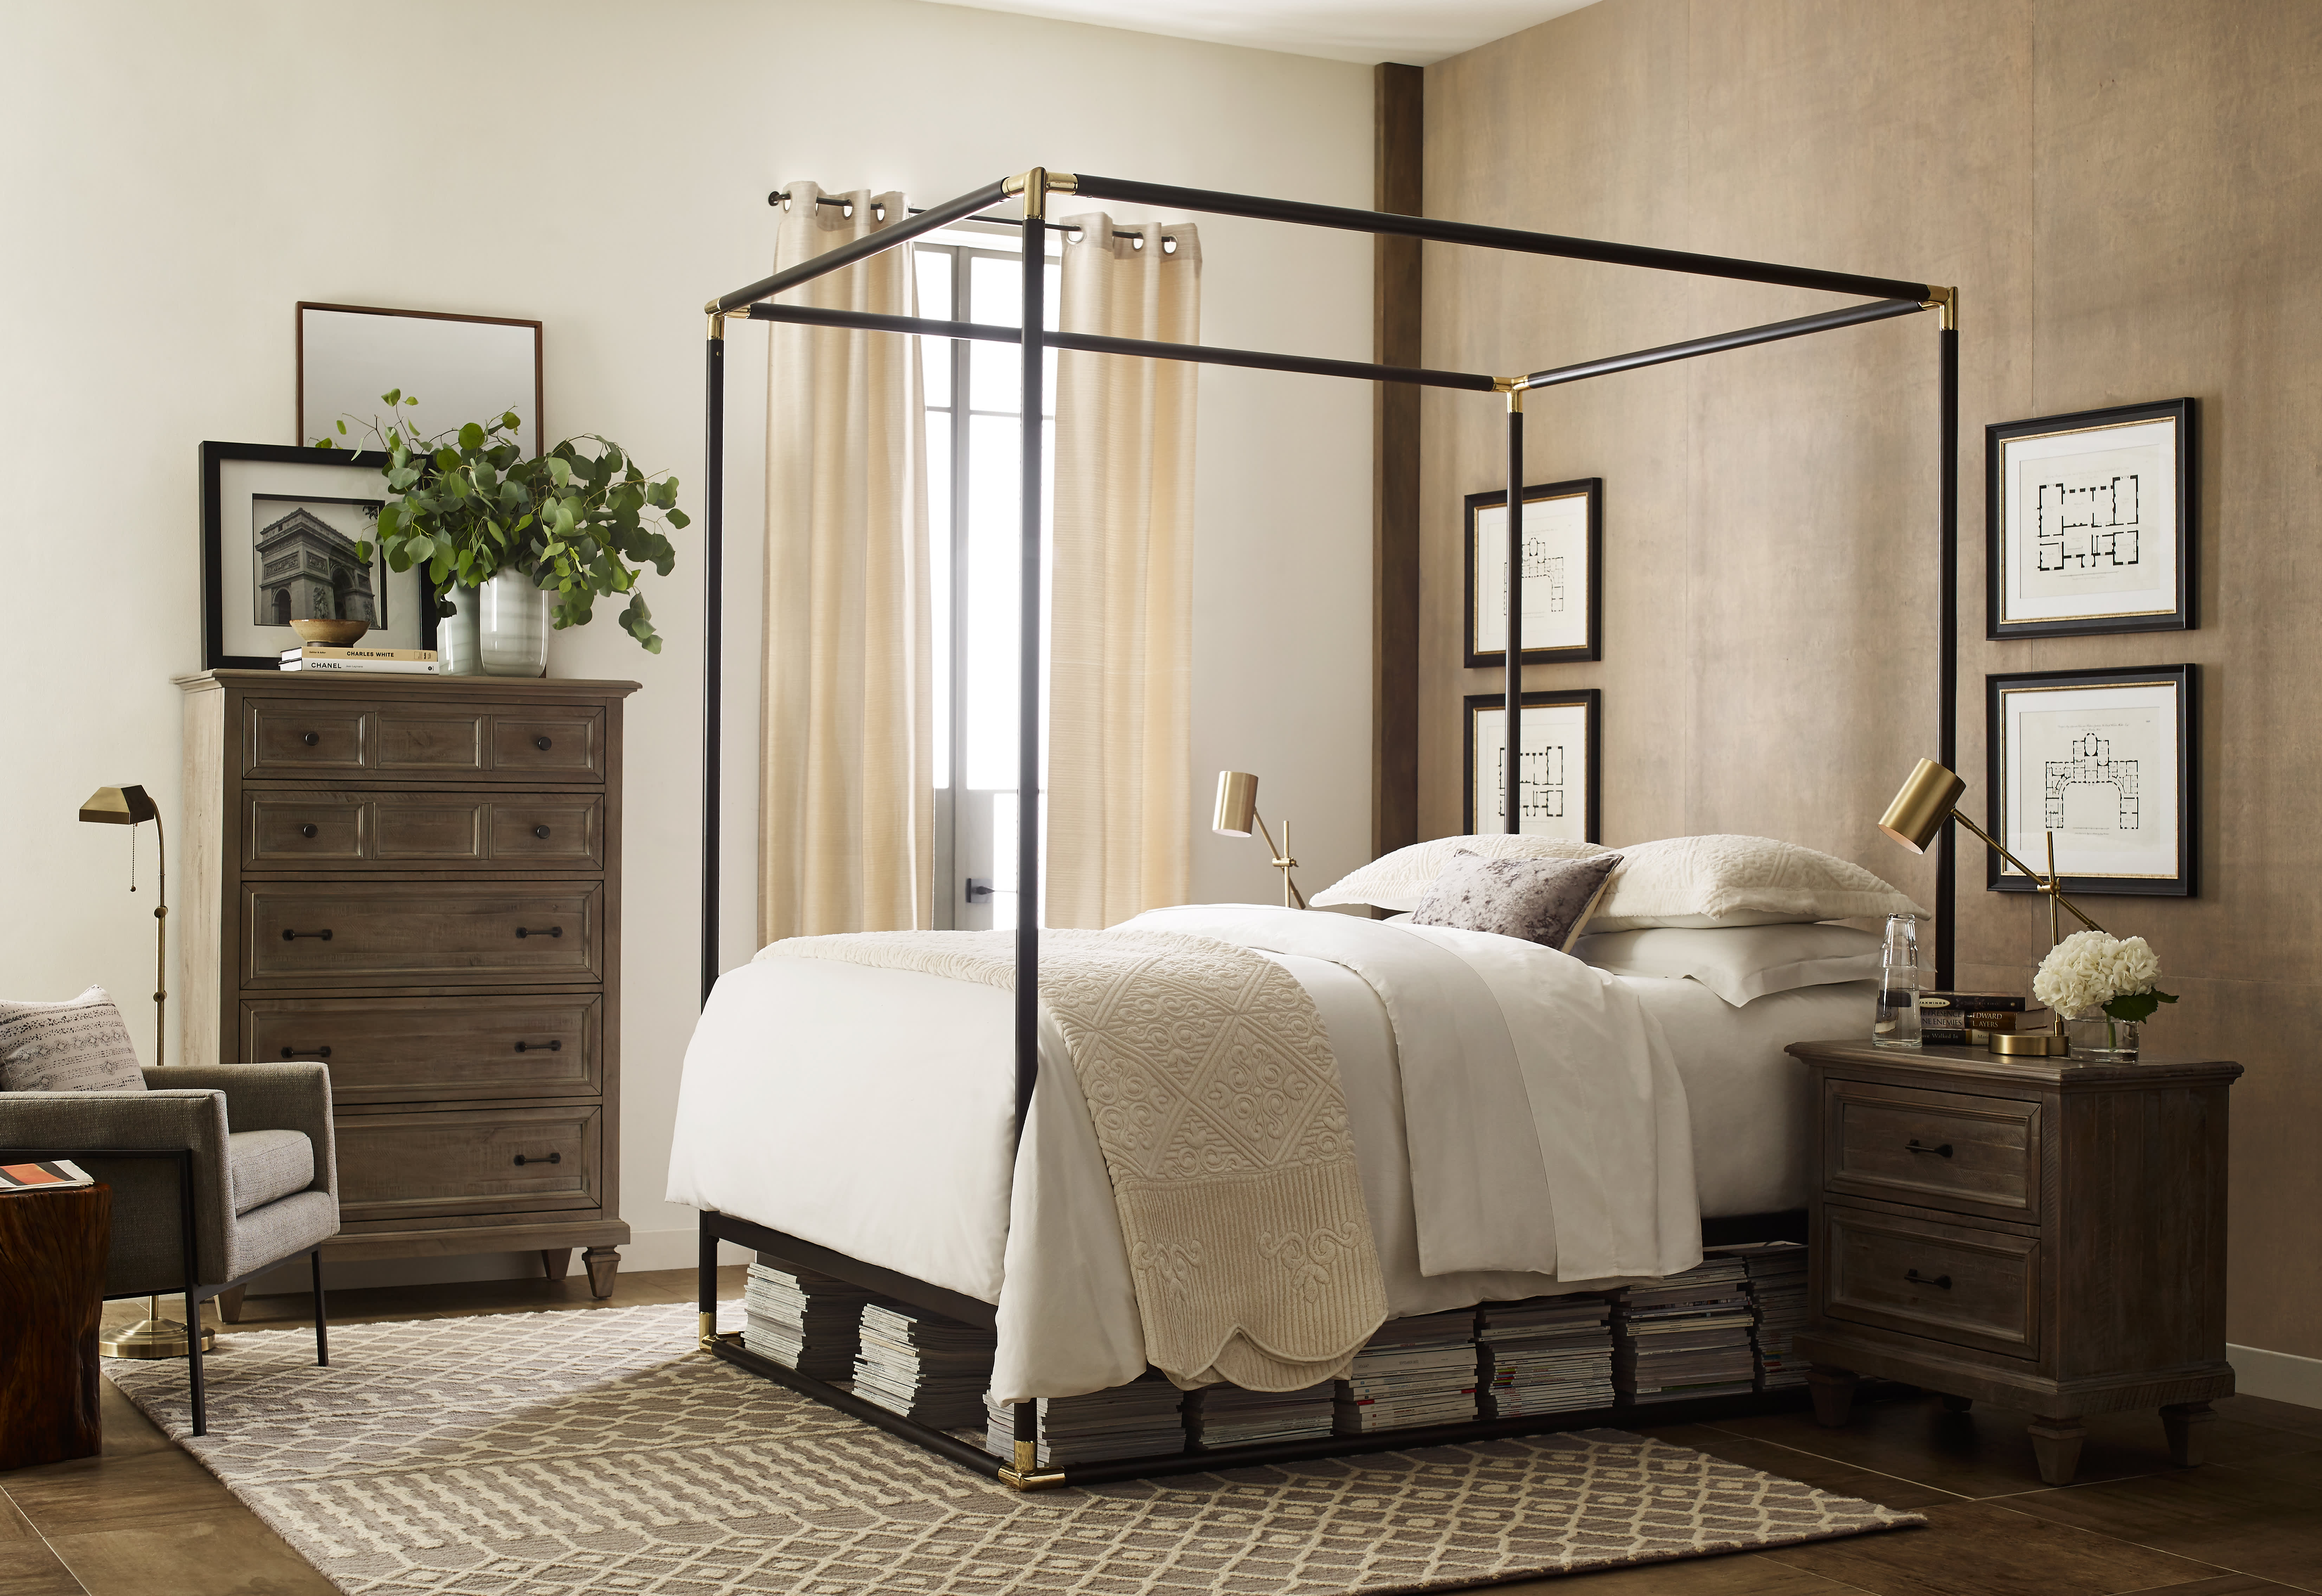 Act Fast Wayfair S Restoration Hardware Style Line Is On Sale For